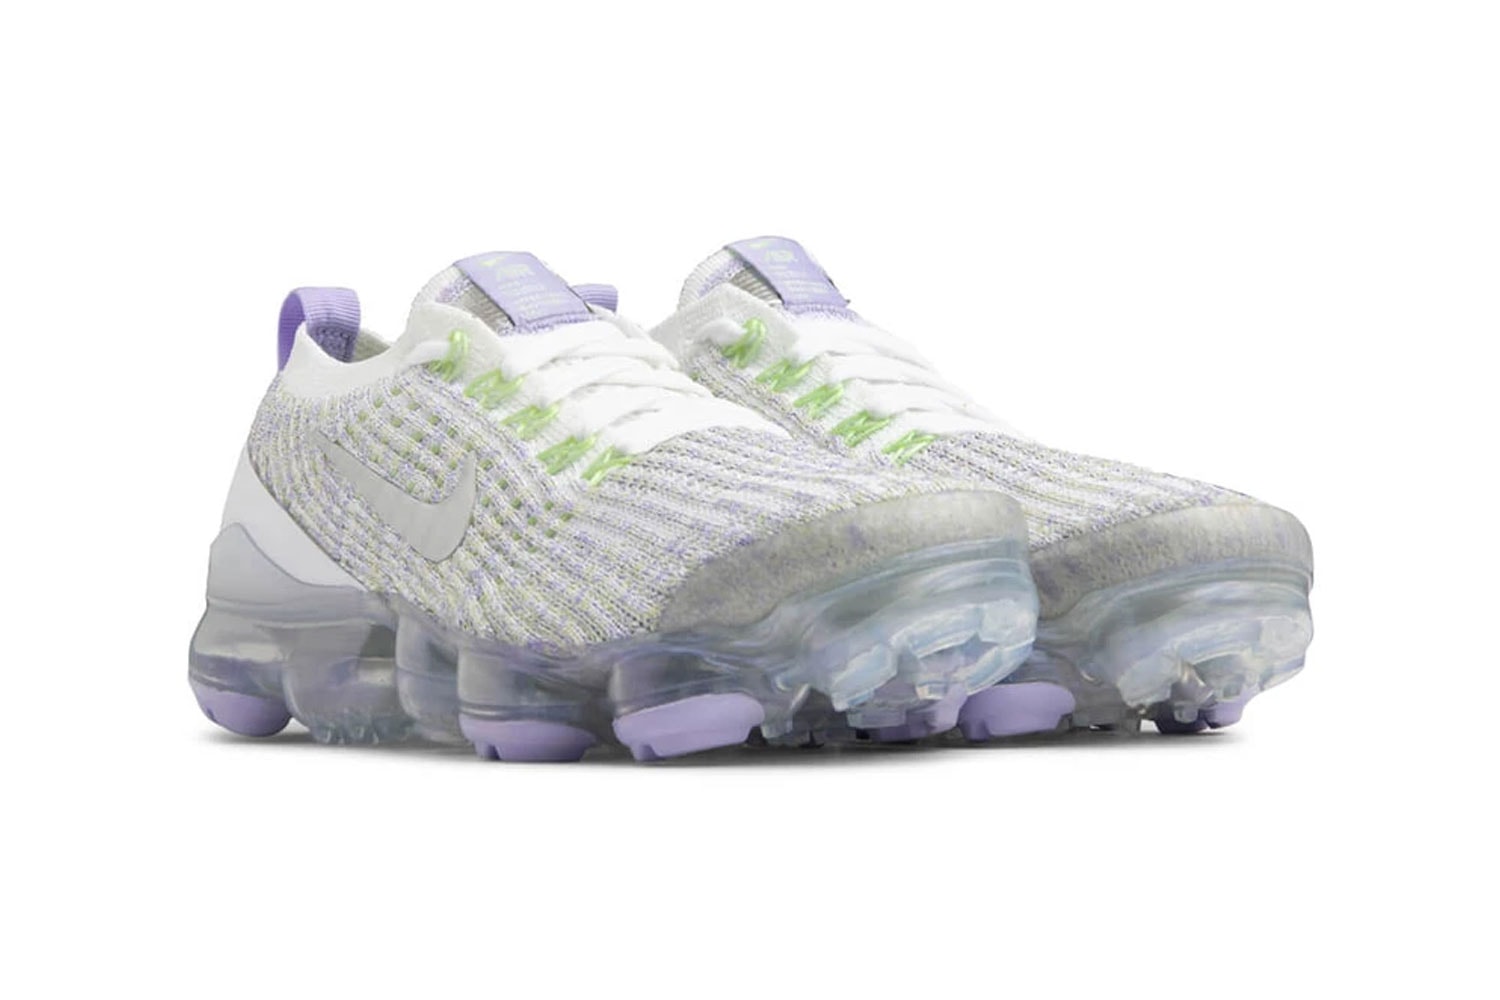 nike air vapormax flyknit 3.0 true white barely volt purple agate release sneakers